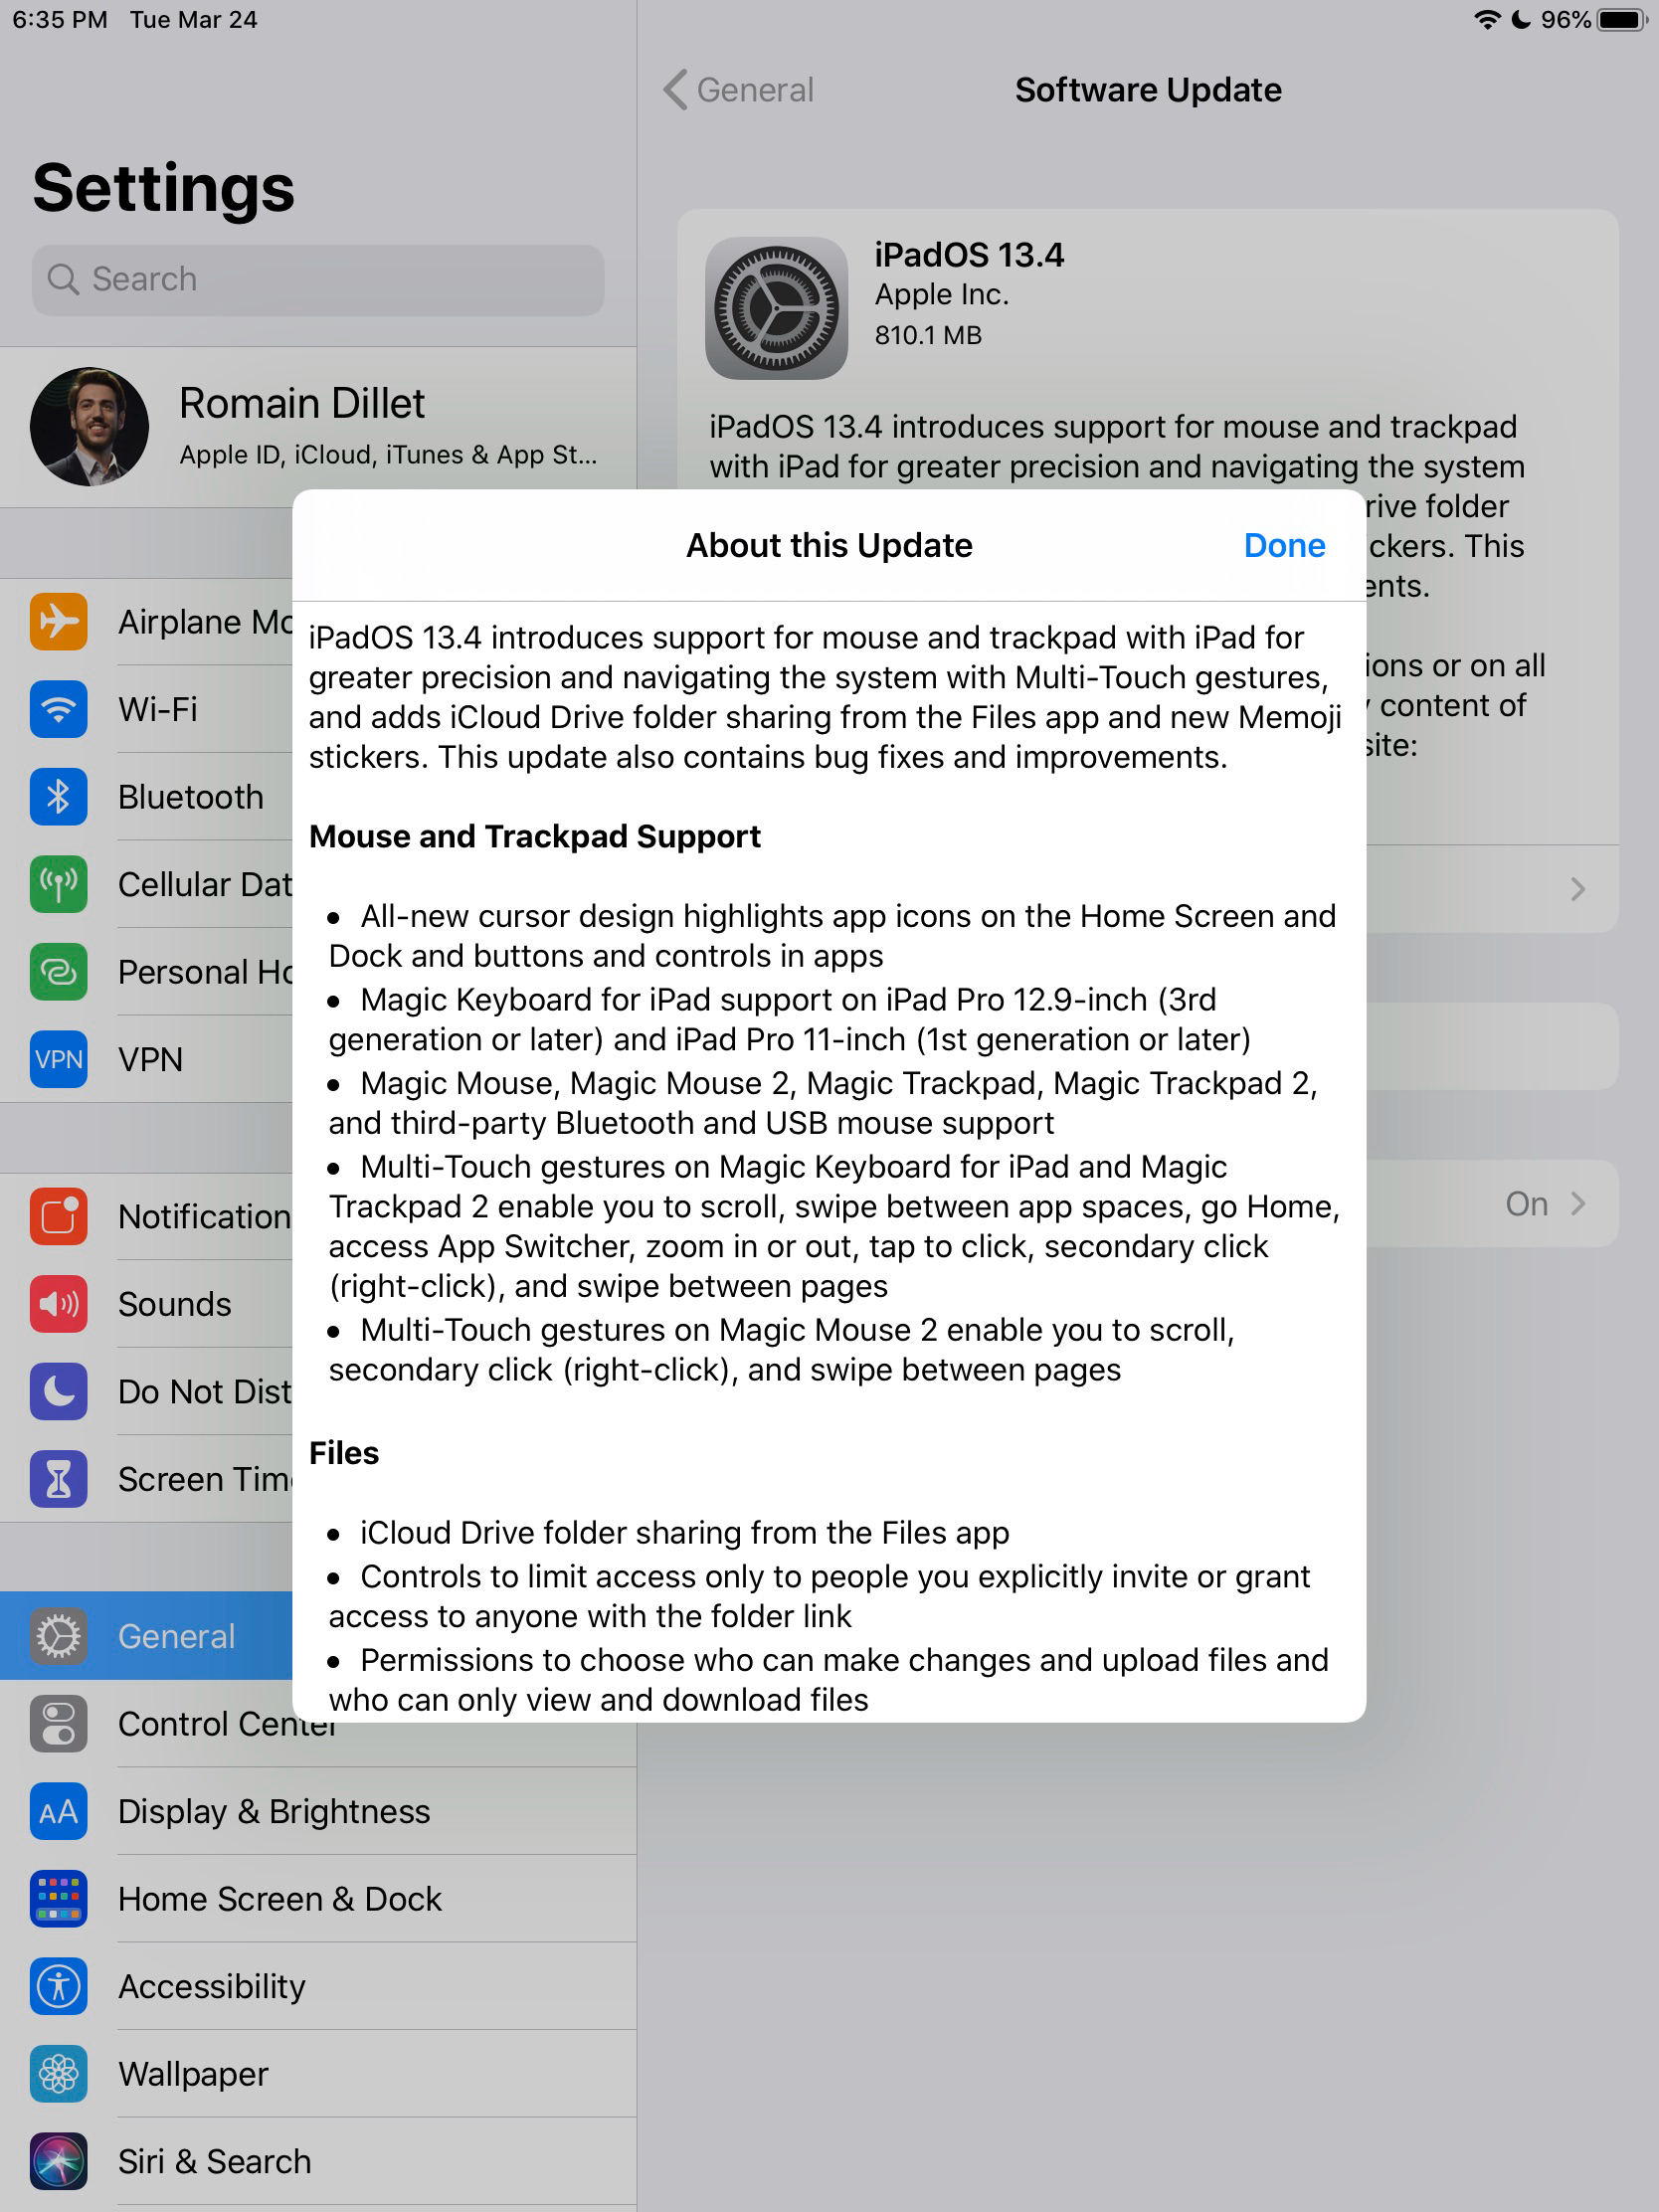 Apple releases iOS and iPadOS 13.4 with trackpad support